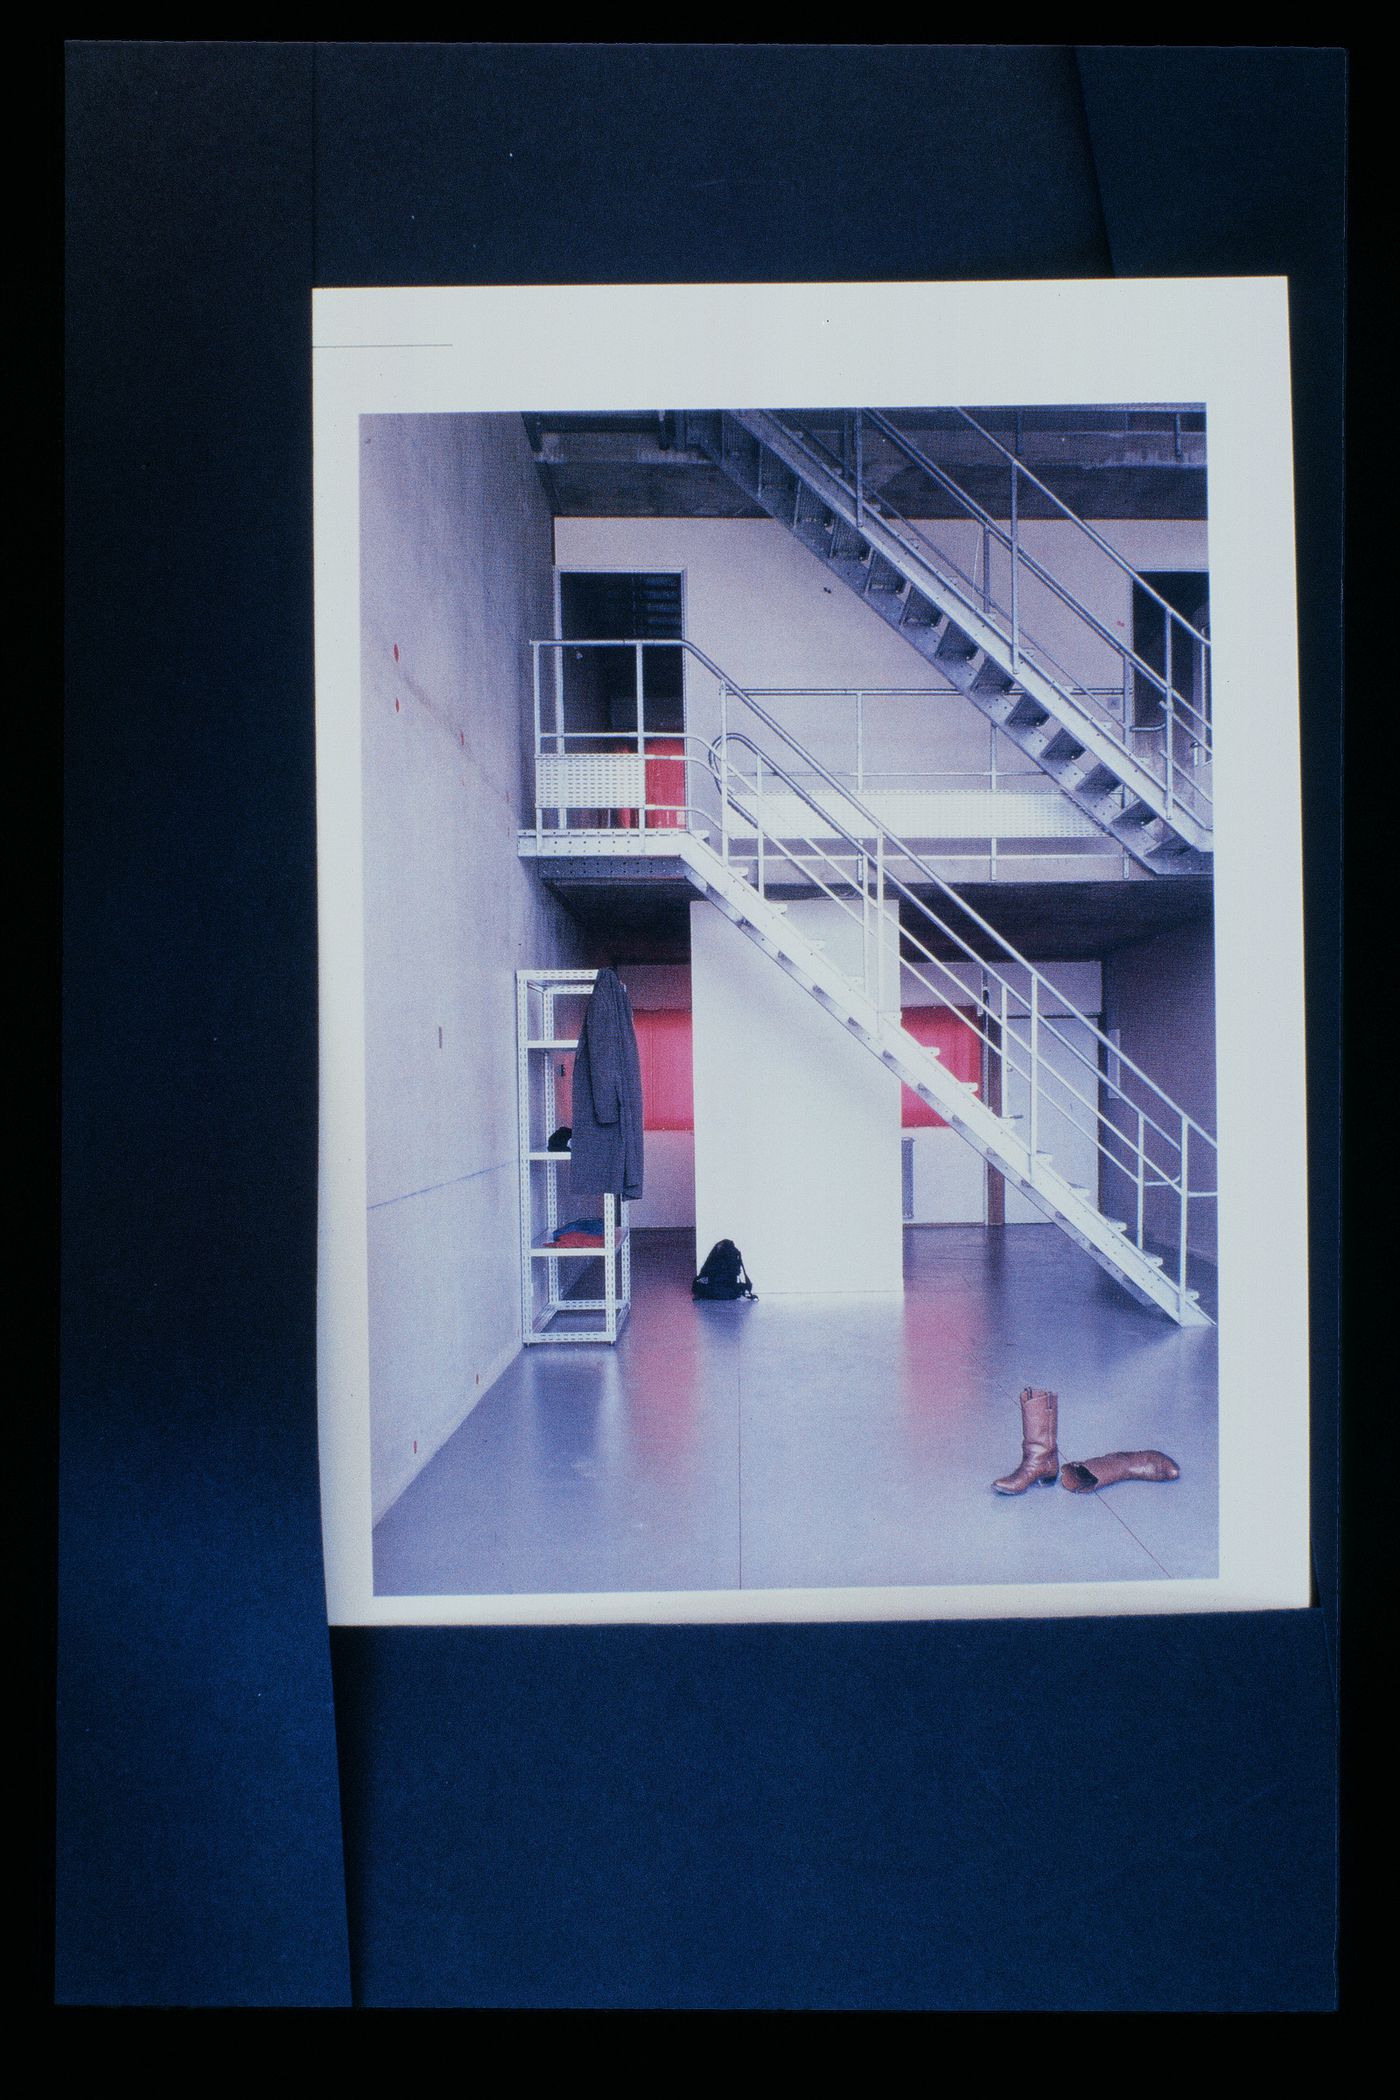 Slide of a photograph of Nemausus I, Nîmes, by Jean Nouvel